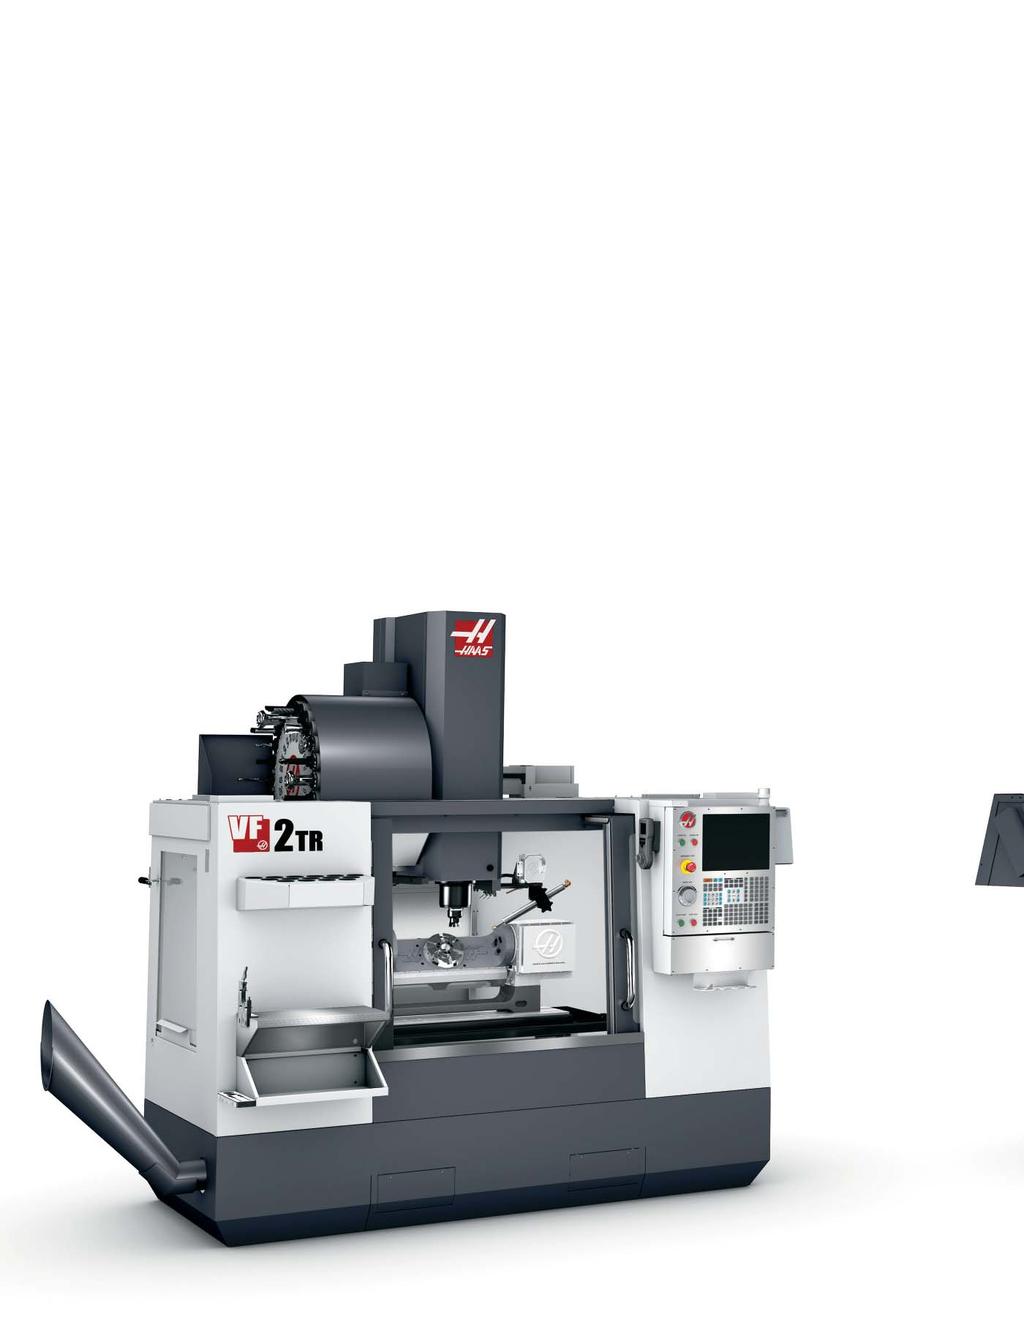 HIGH-PERFORMANCE VMCs 5-Axis Trunnion Machines The Haas Trunnion Series machines are versatile 5-axis machining centers that provide full, simultaneous 5-axis